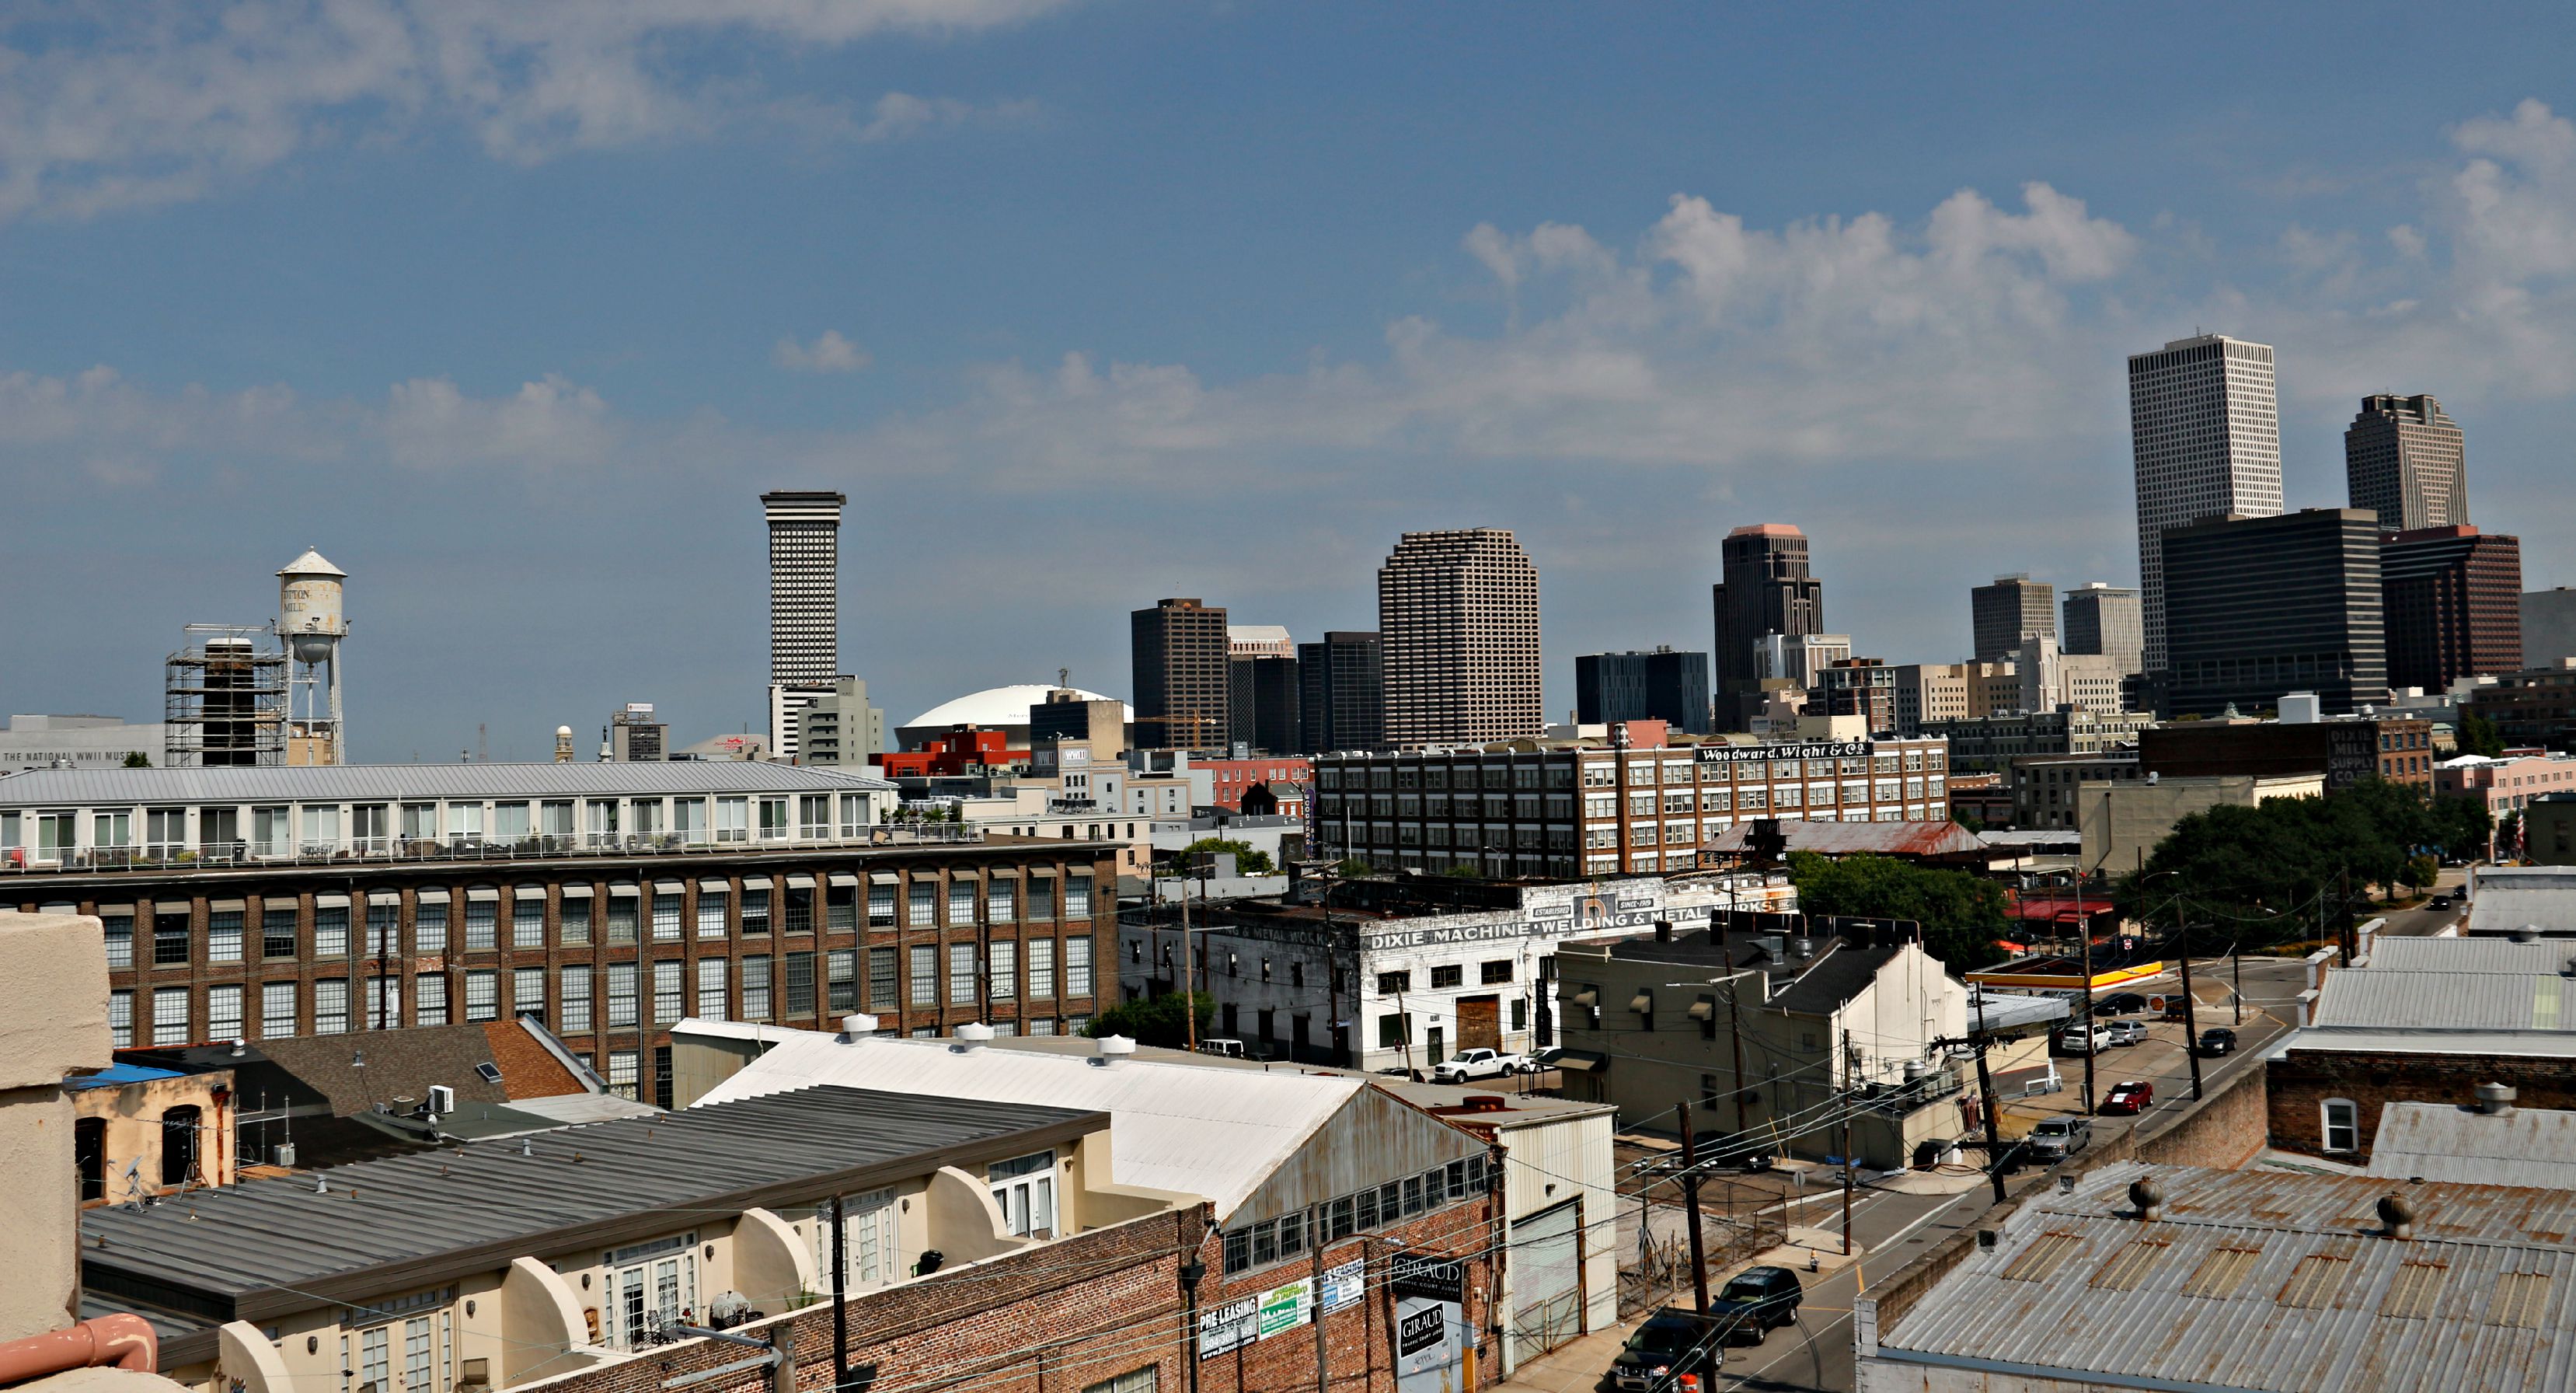 New_Orleans_Warehouse_District_2.jpg